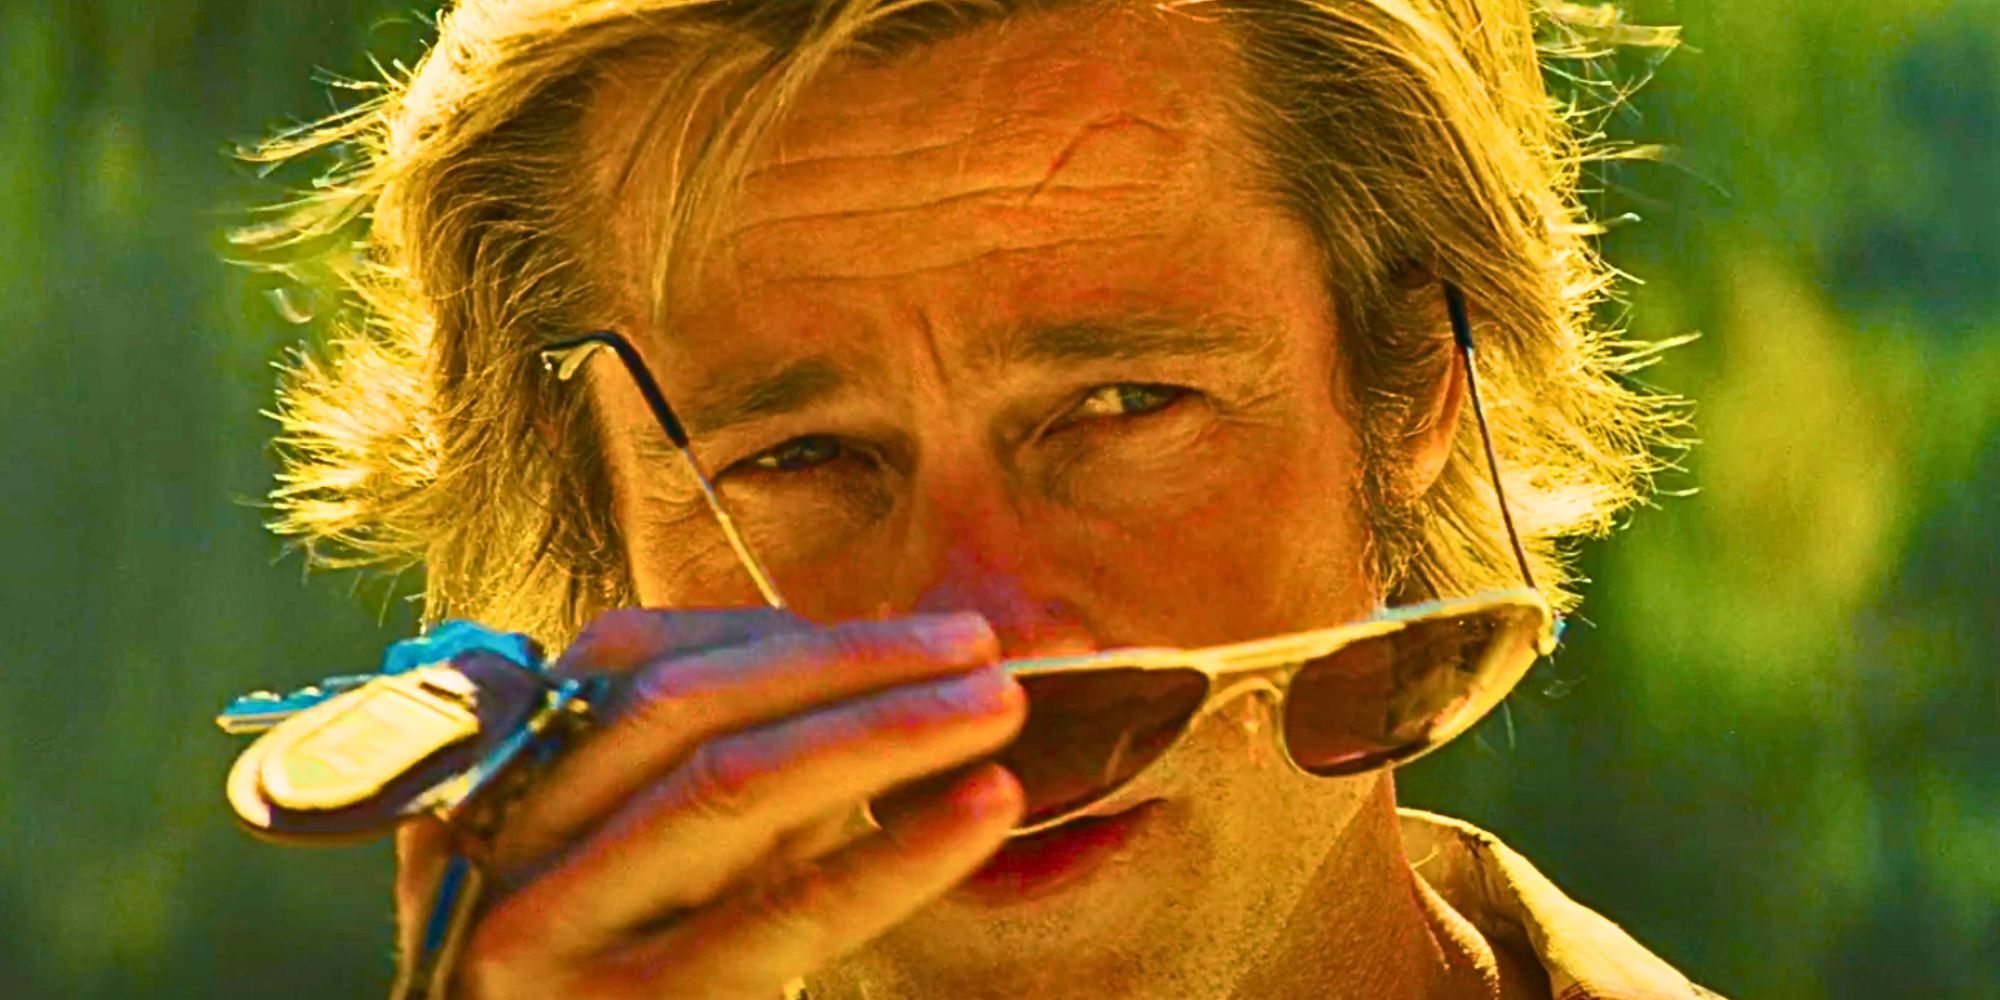 Brad Pitt as Cliff booth removing his sunglasses in Once Upon a Time in Hollywood